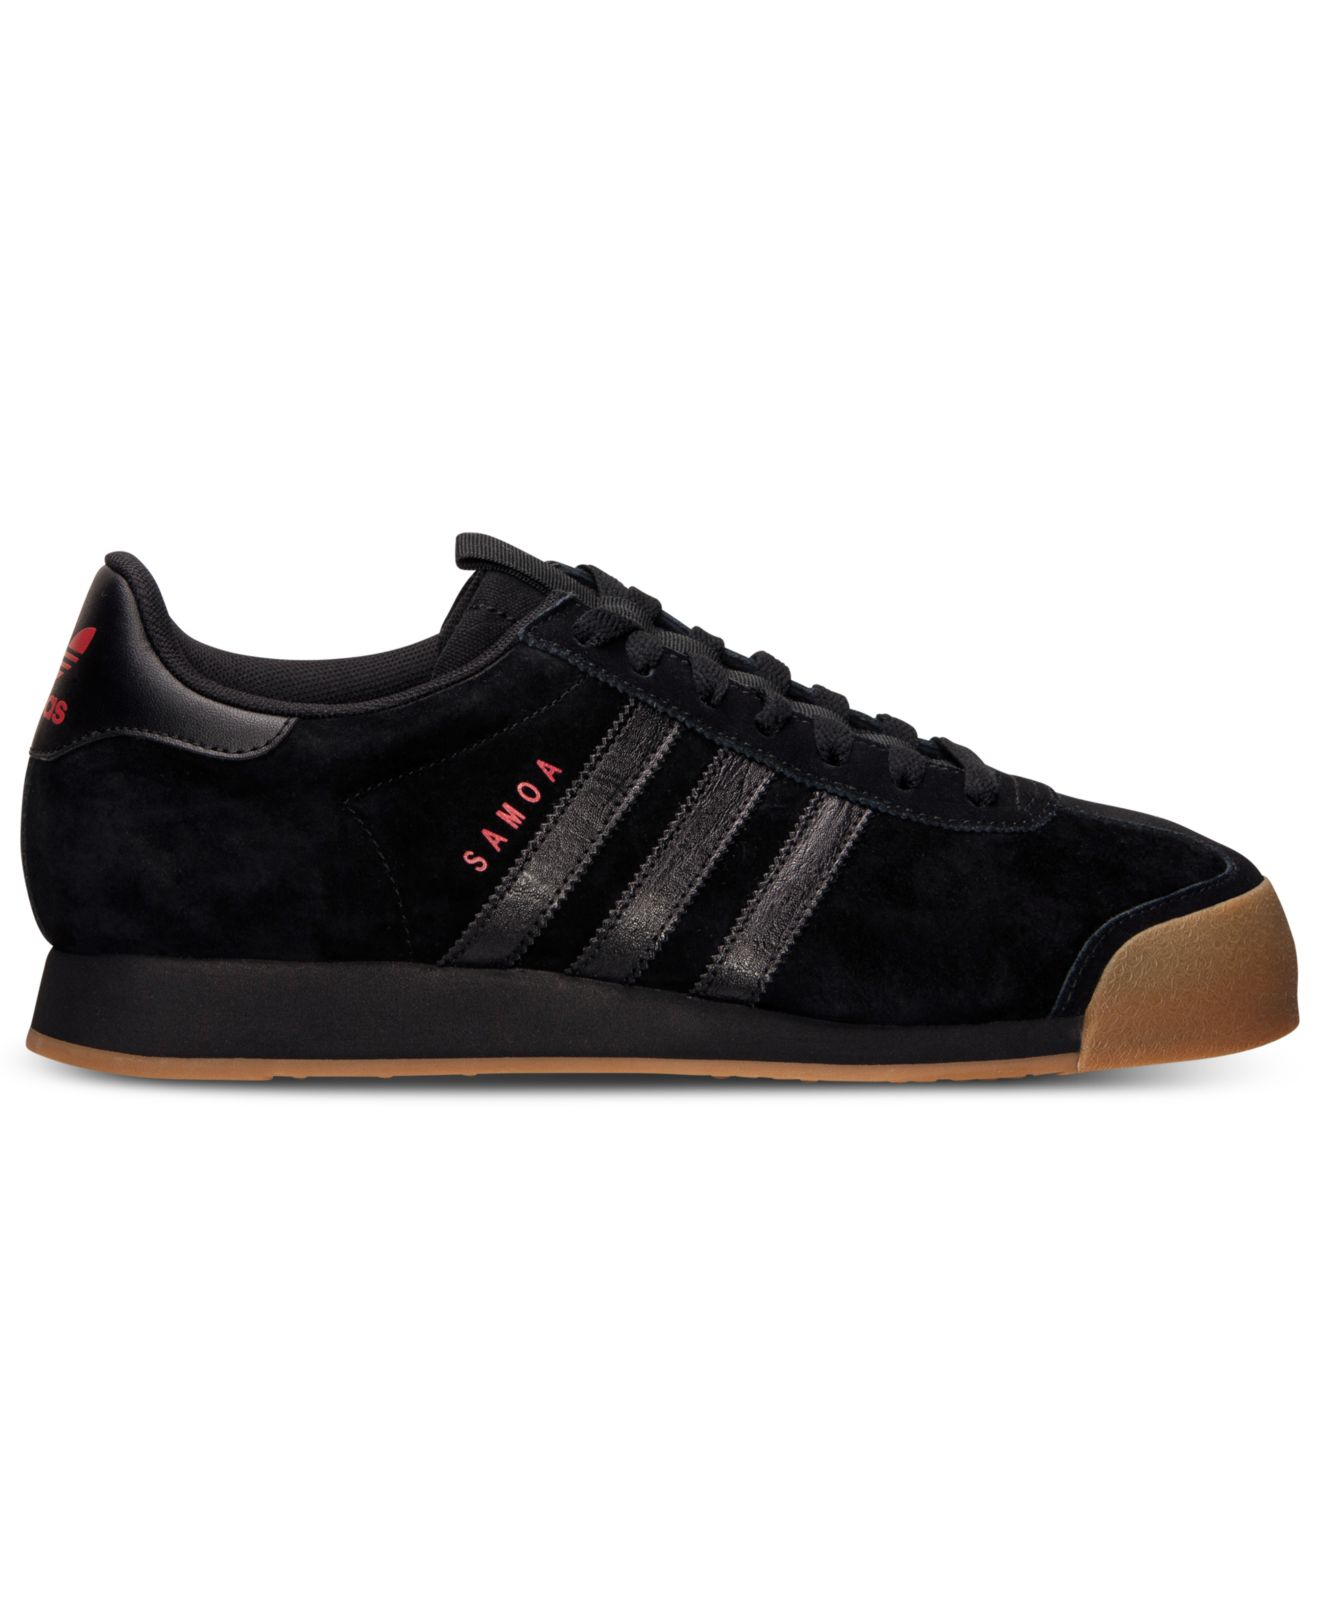 Lyst - Adidas Men'S Samoa Casual Sneakers From Finish Line in Black for Men